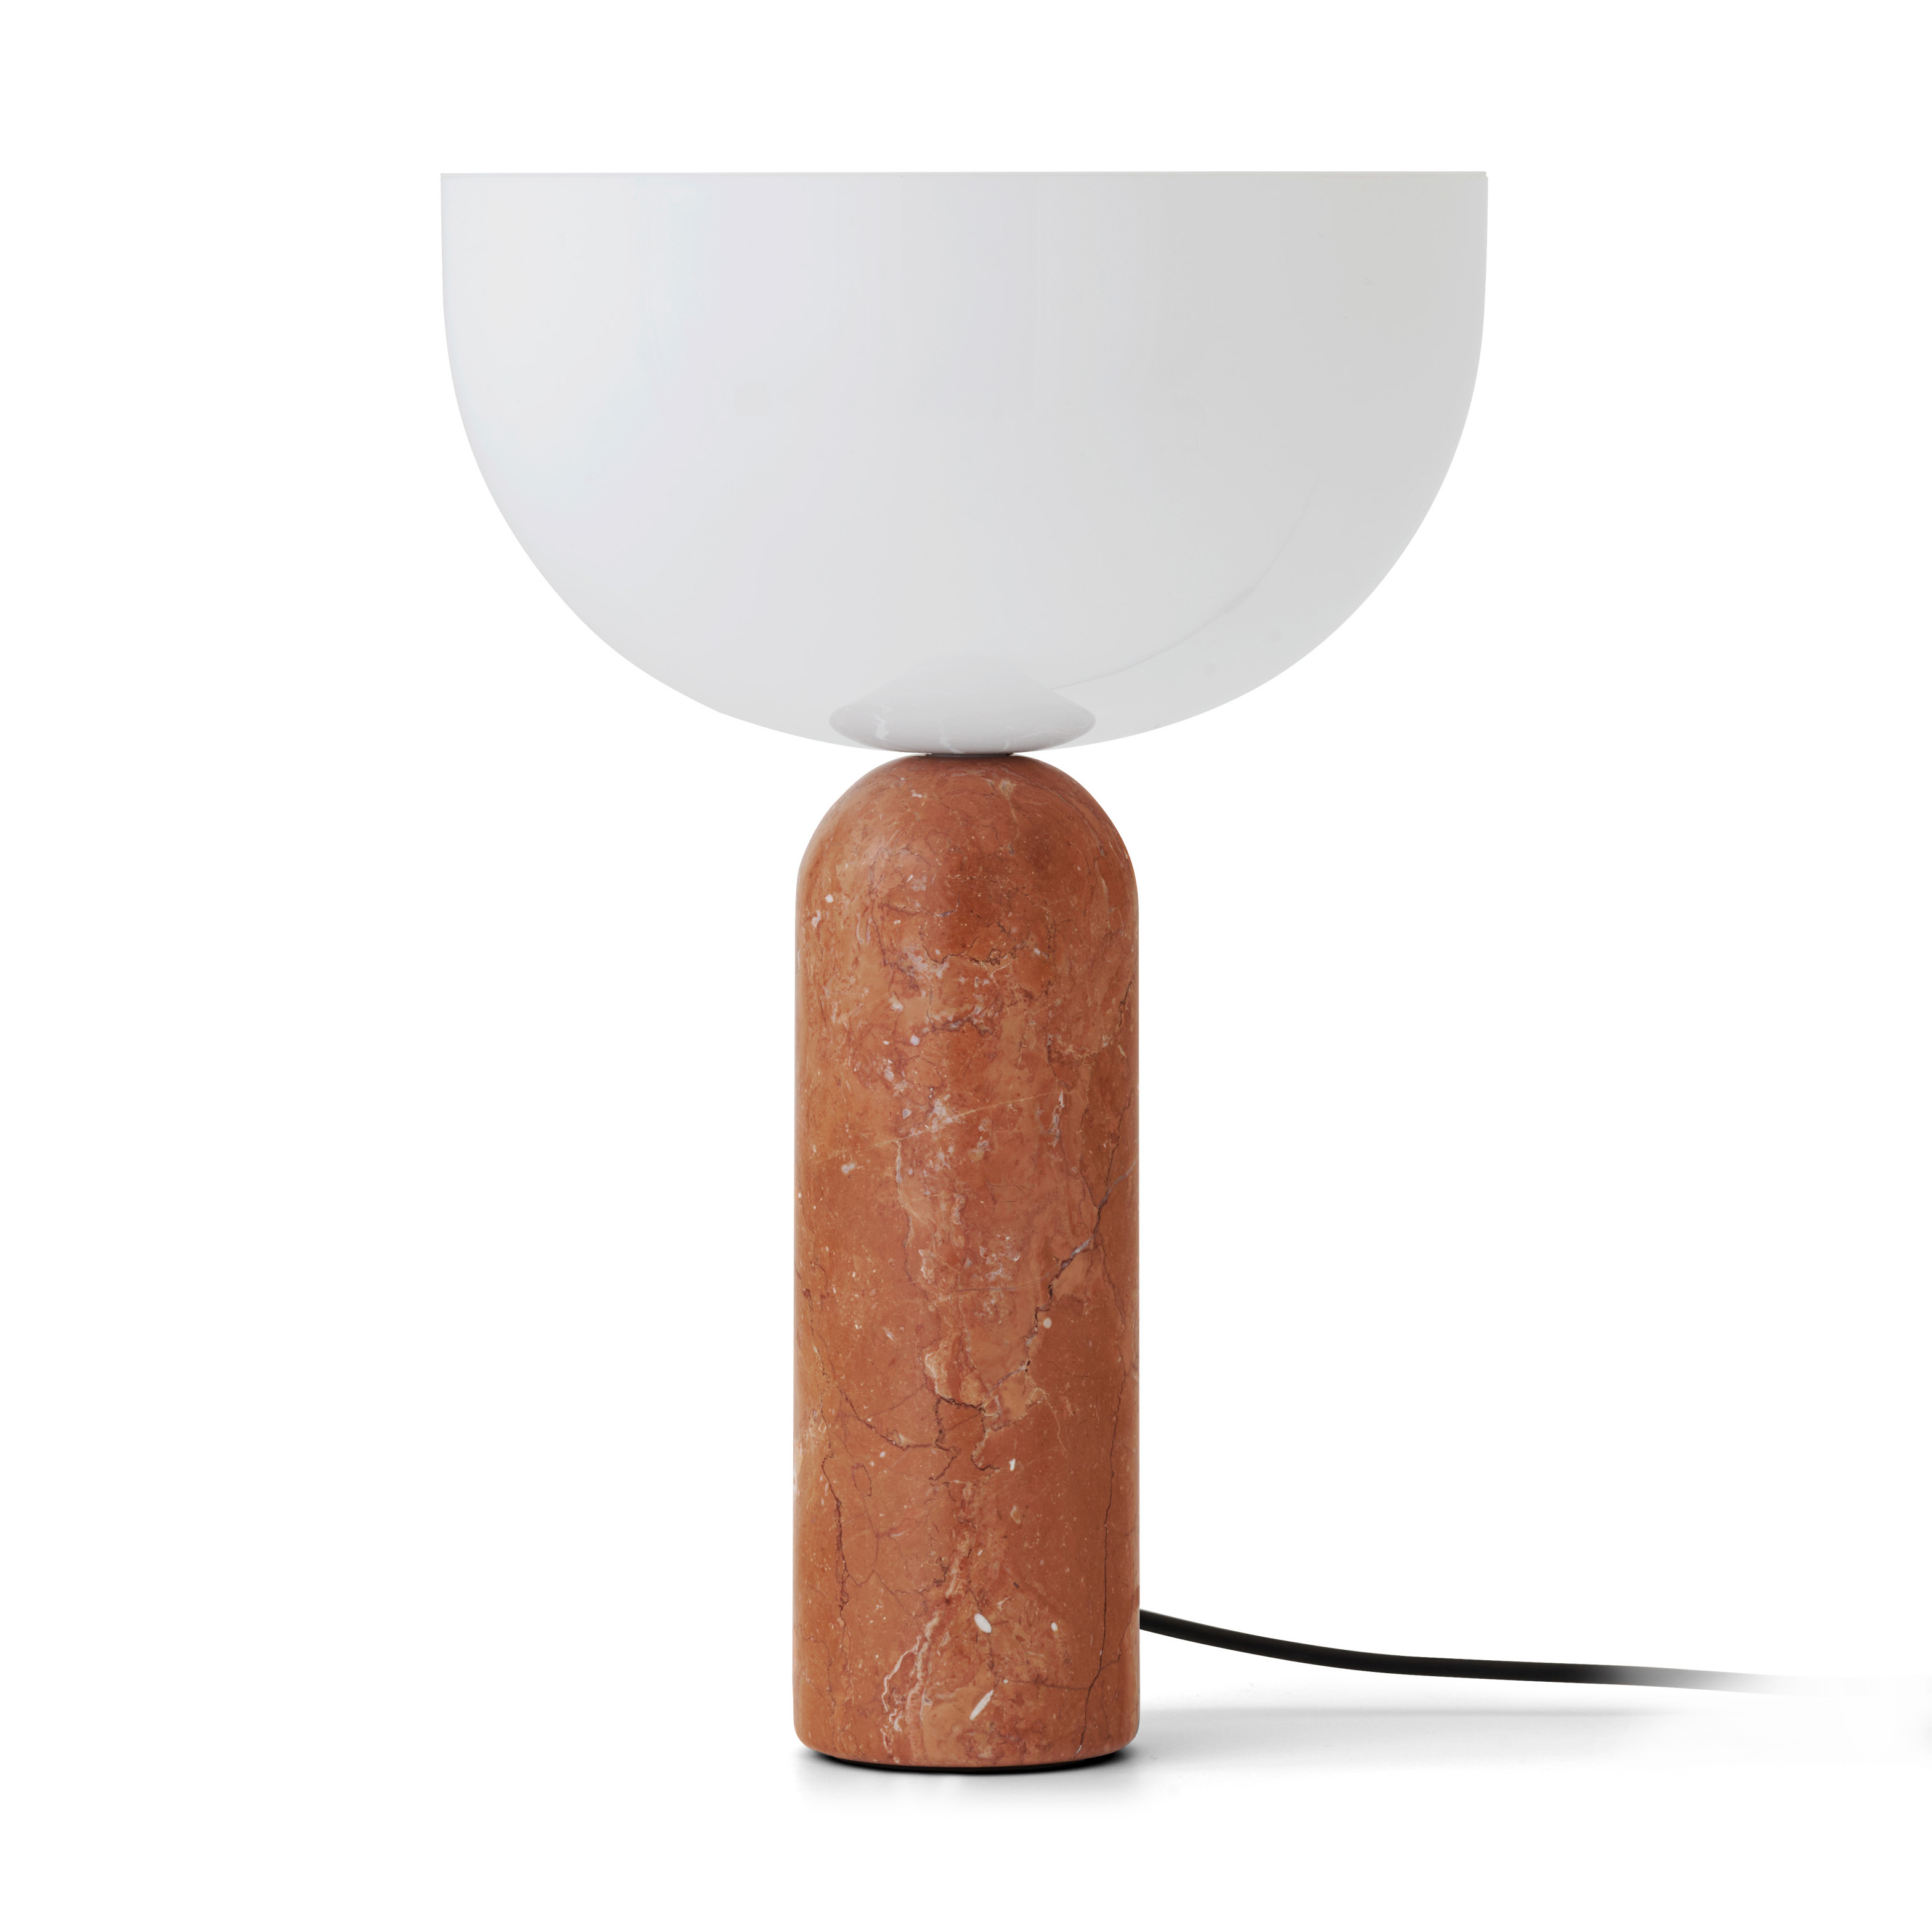 Kizu table lamp large from New Works - NordicNest.com